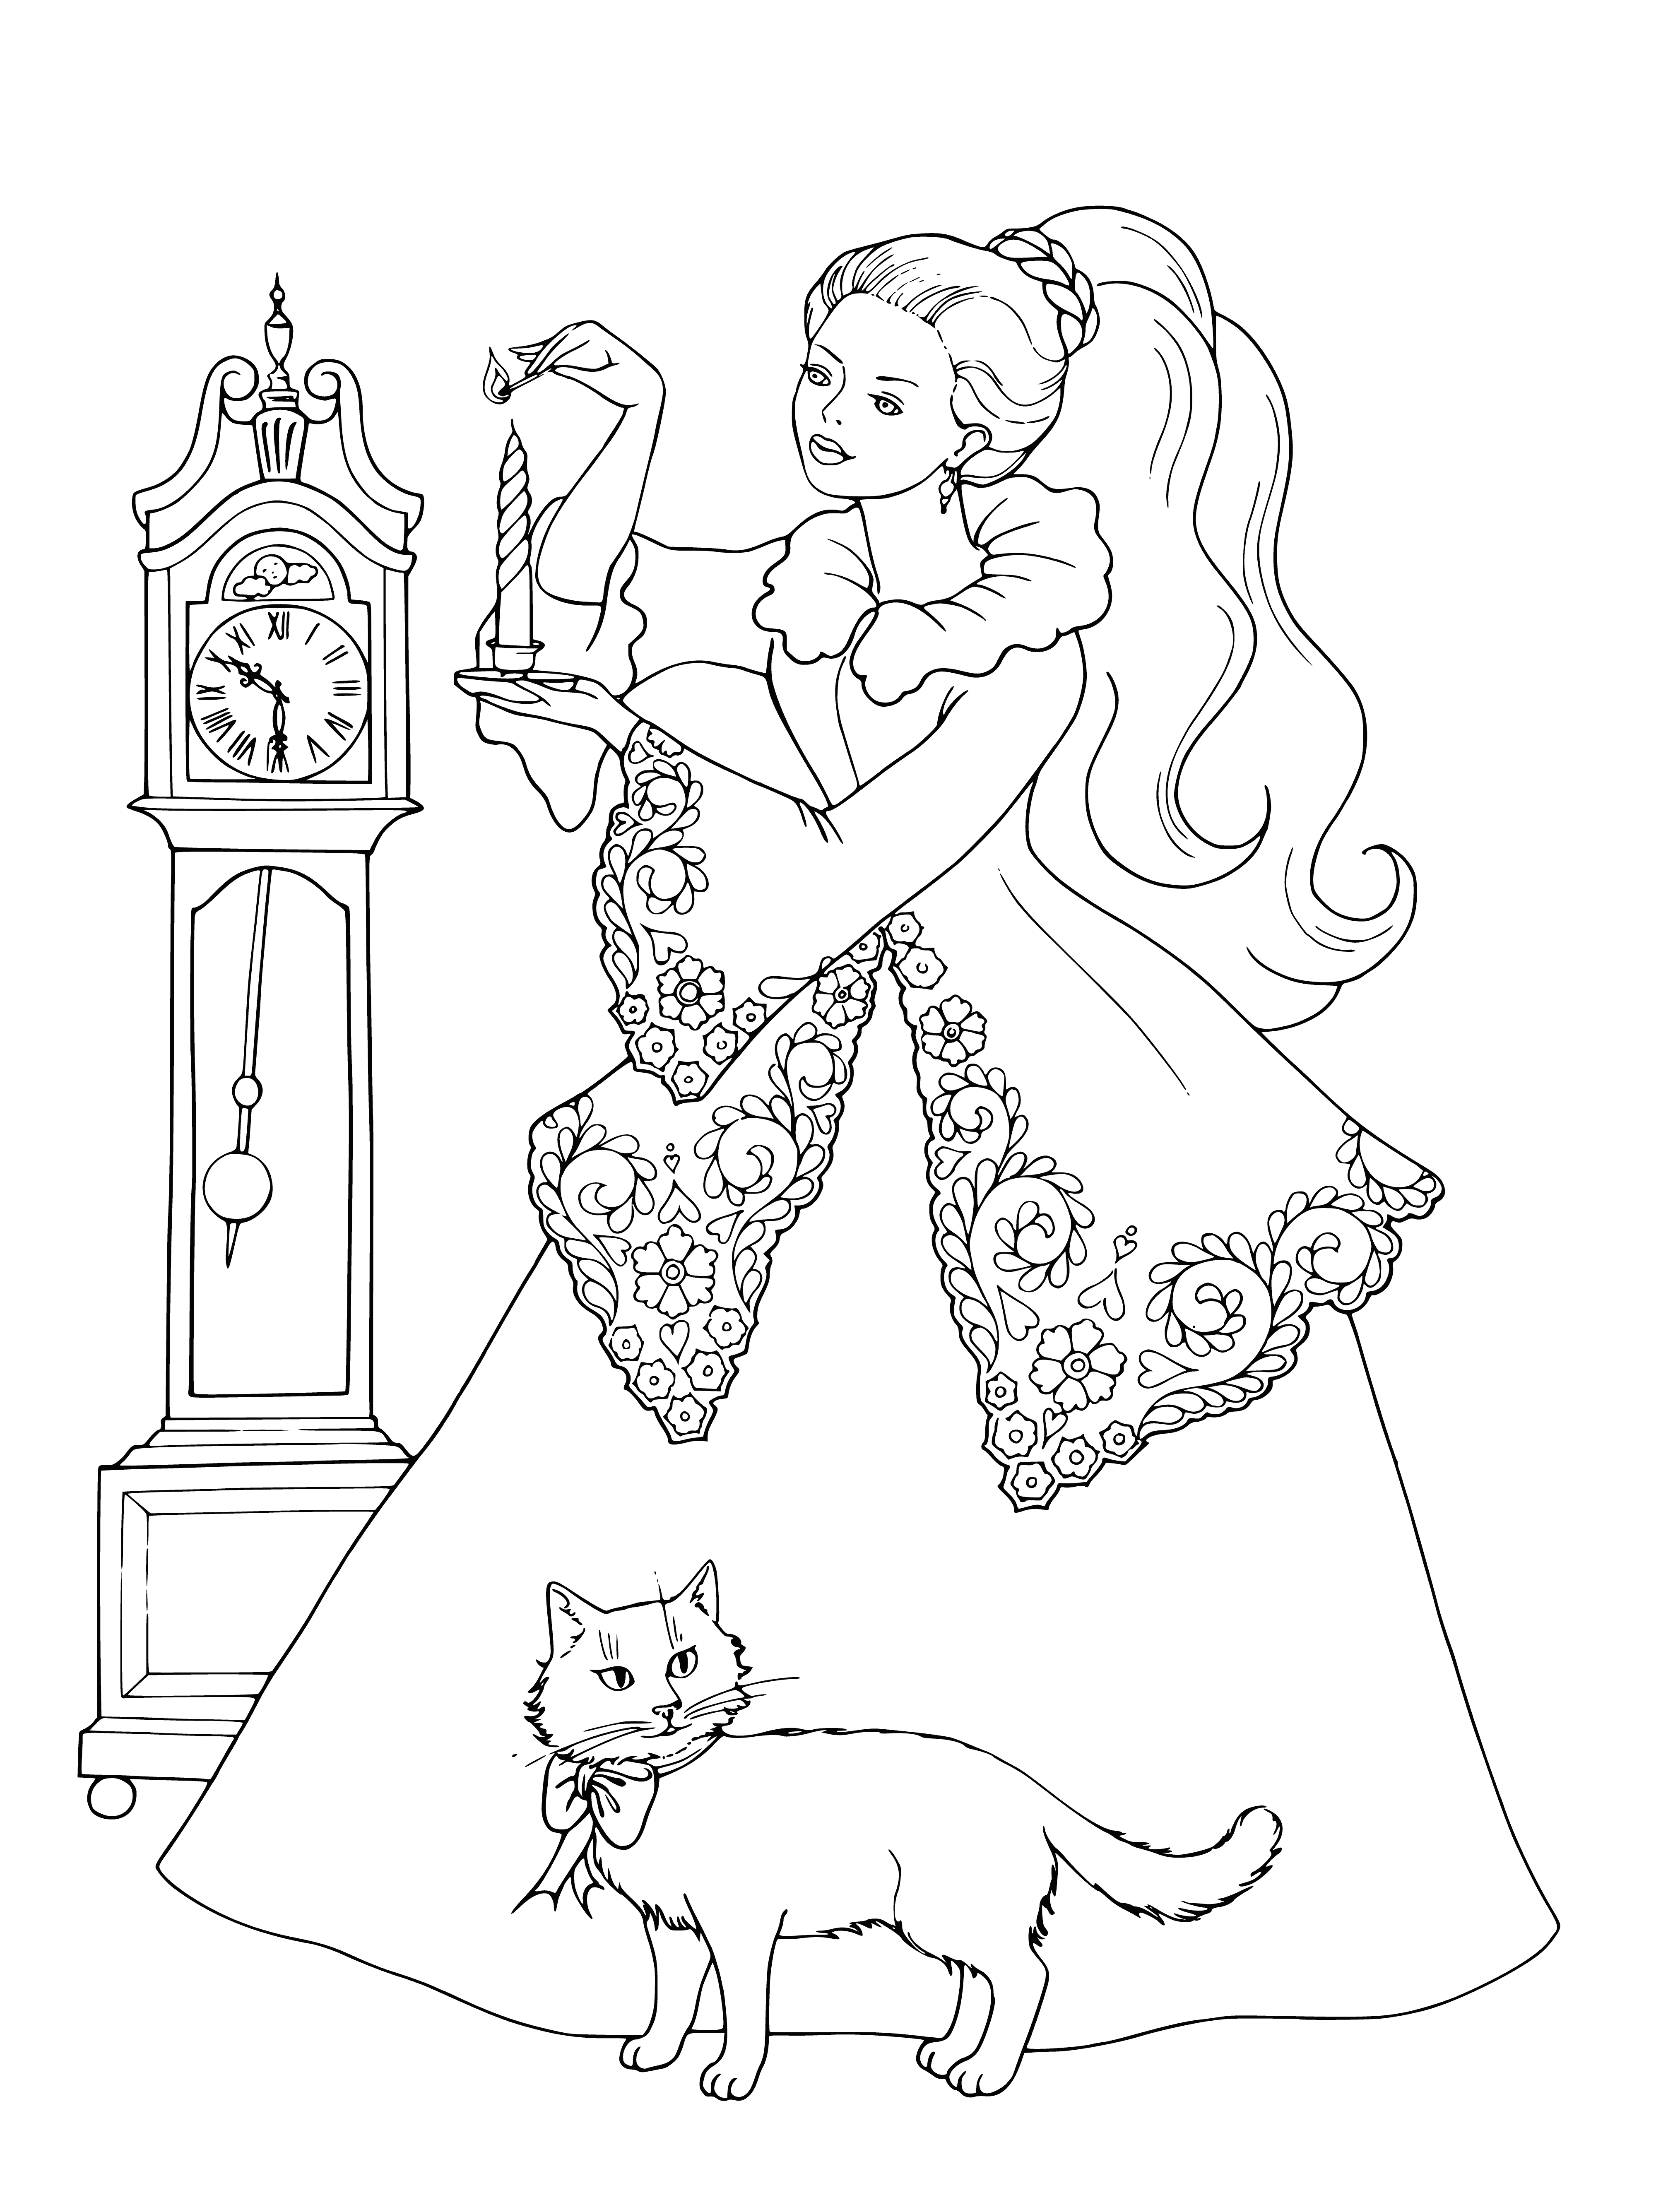 coloring page: Princess in pink dress & blue scarf, holding pink balloon & wearing golden crown, stands next to gray cat.